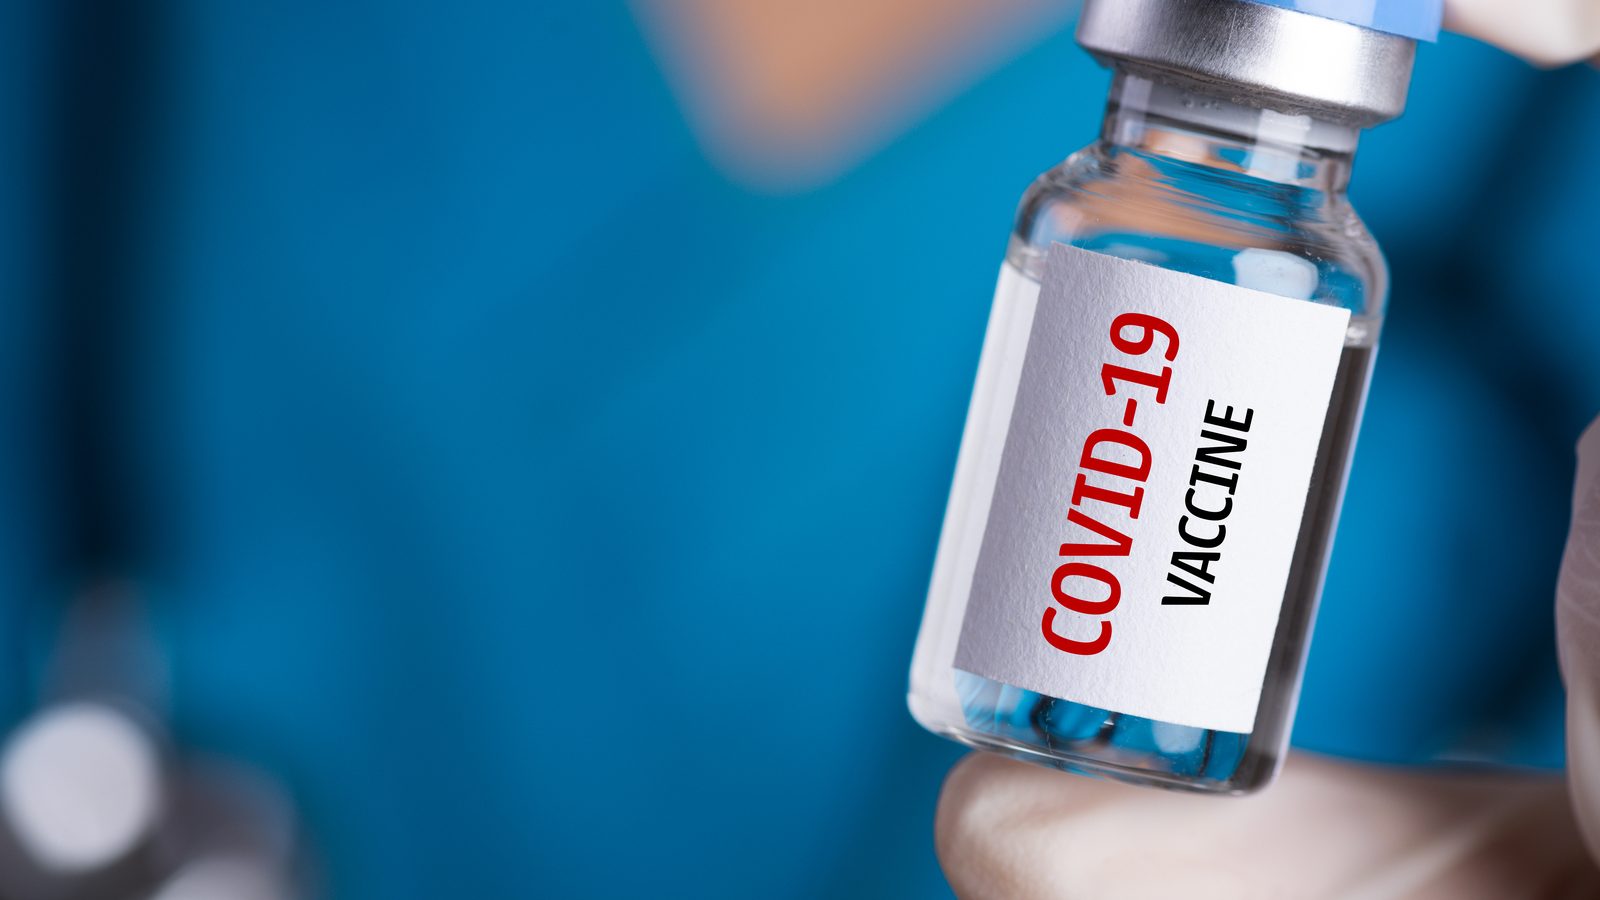 Frontlist | Over 7 million vaccinated against covid-19 in only 26 days